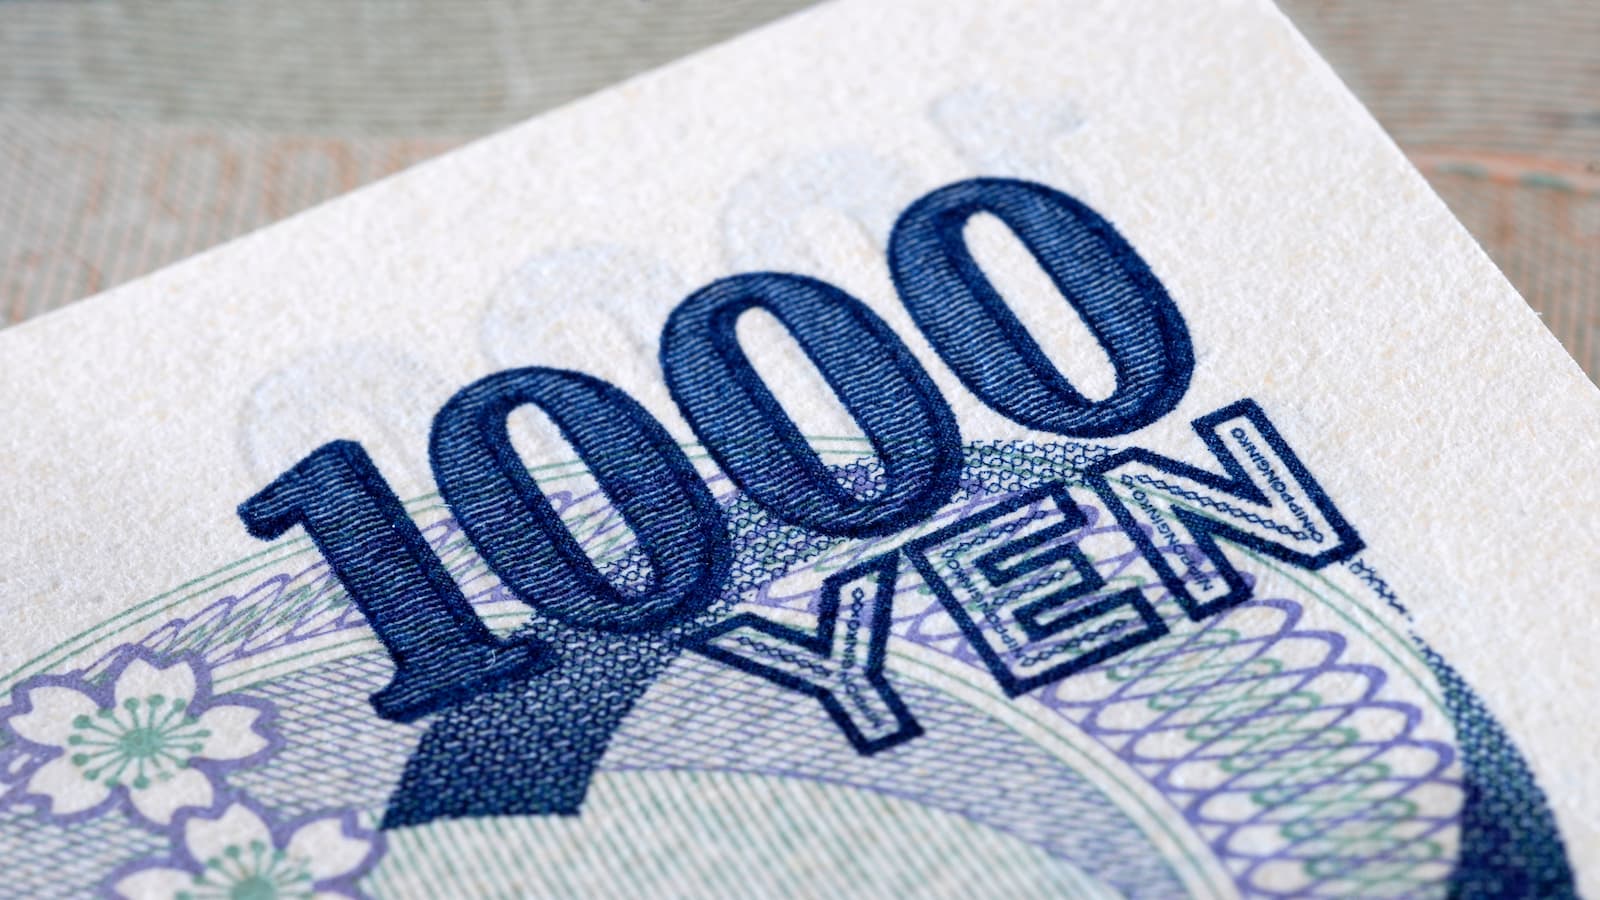 USD/JPY Forecast: Projects Medium-Term Decline Amid Monetary Policy Changes